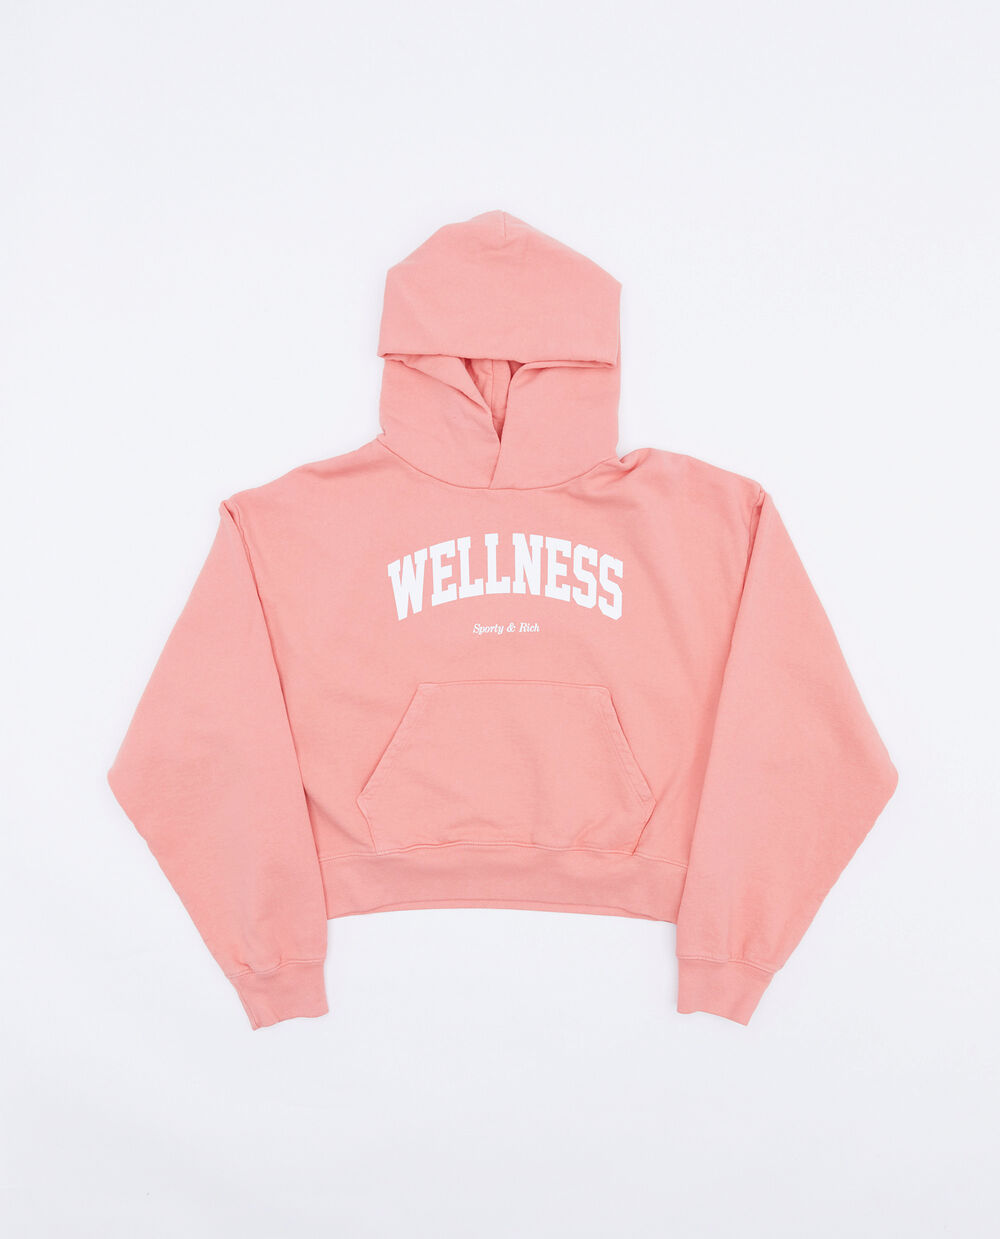 SPORTY & RICH WELLNESS IVY CROPPED HOODIE